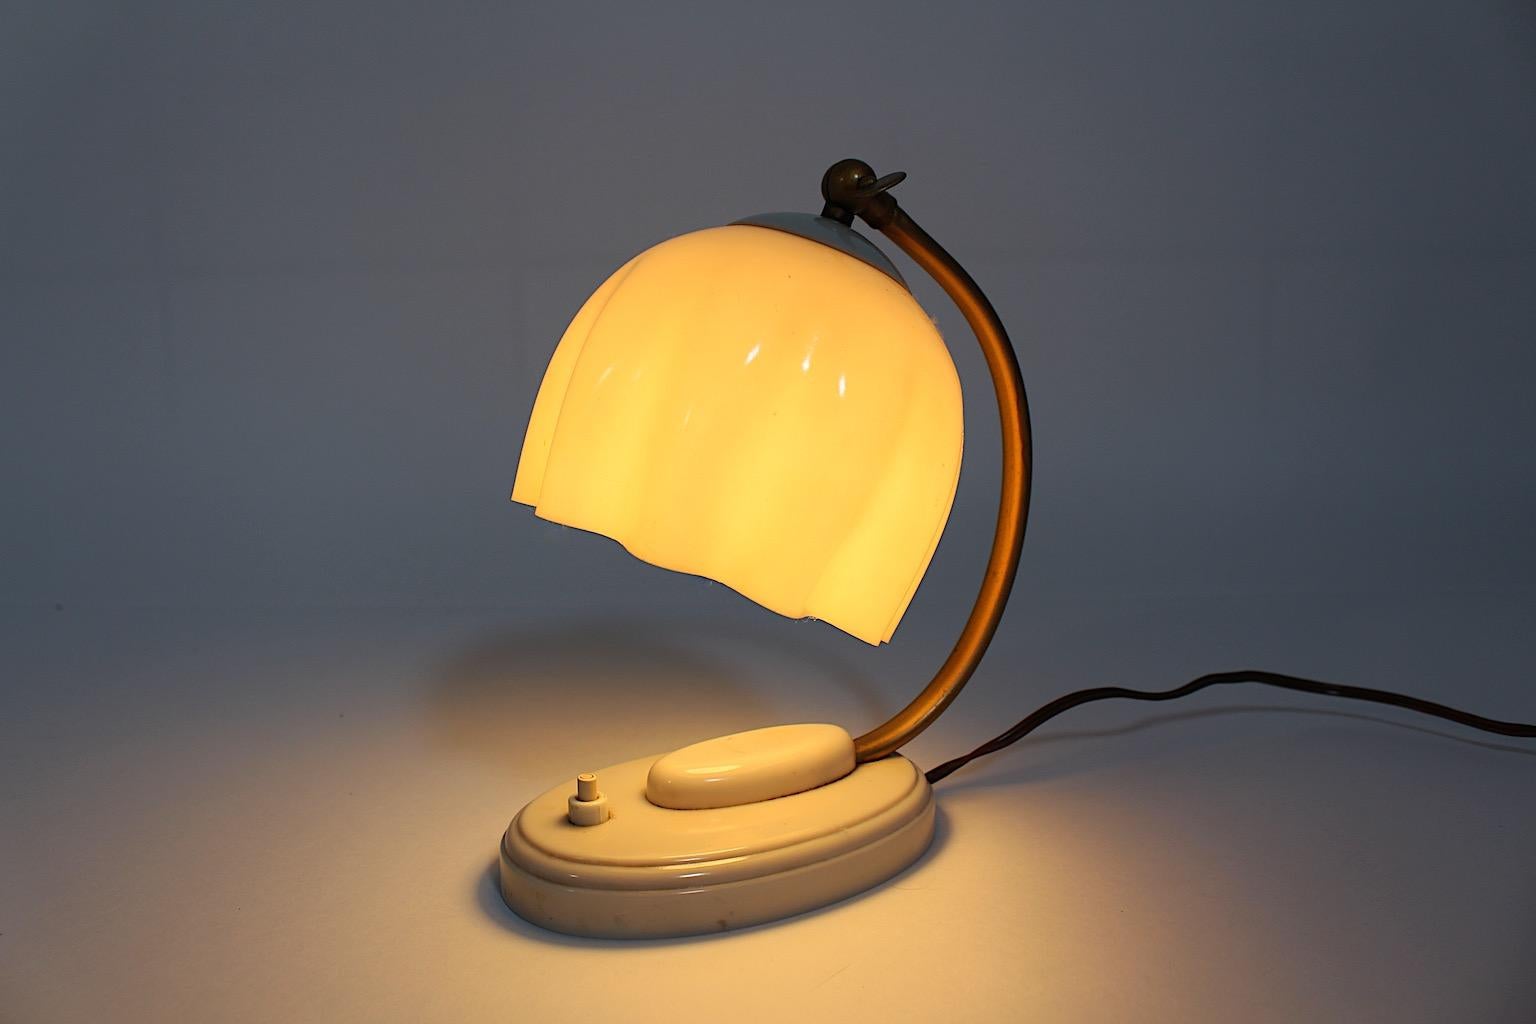 Mid Century Modern Vintage White Fazzoletto table lamp or bedside lamp from bakelite and golden metal 1950s Germany.
A stunning vintage table lamp or bedside lamp from bakelite in white cream color with a golden lacquered and slightly curved metal